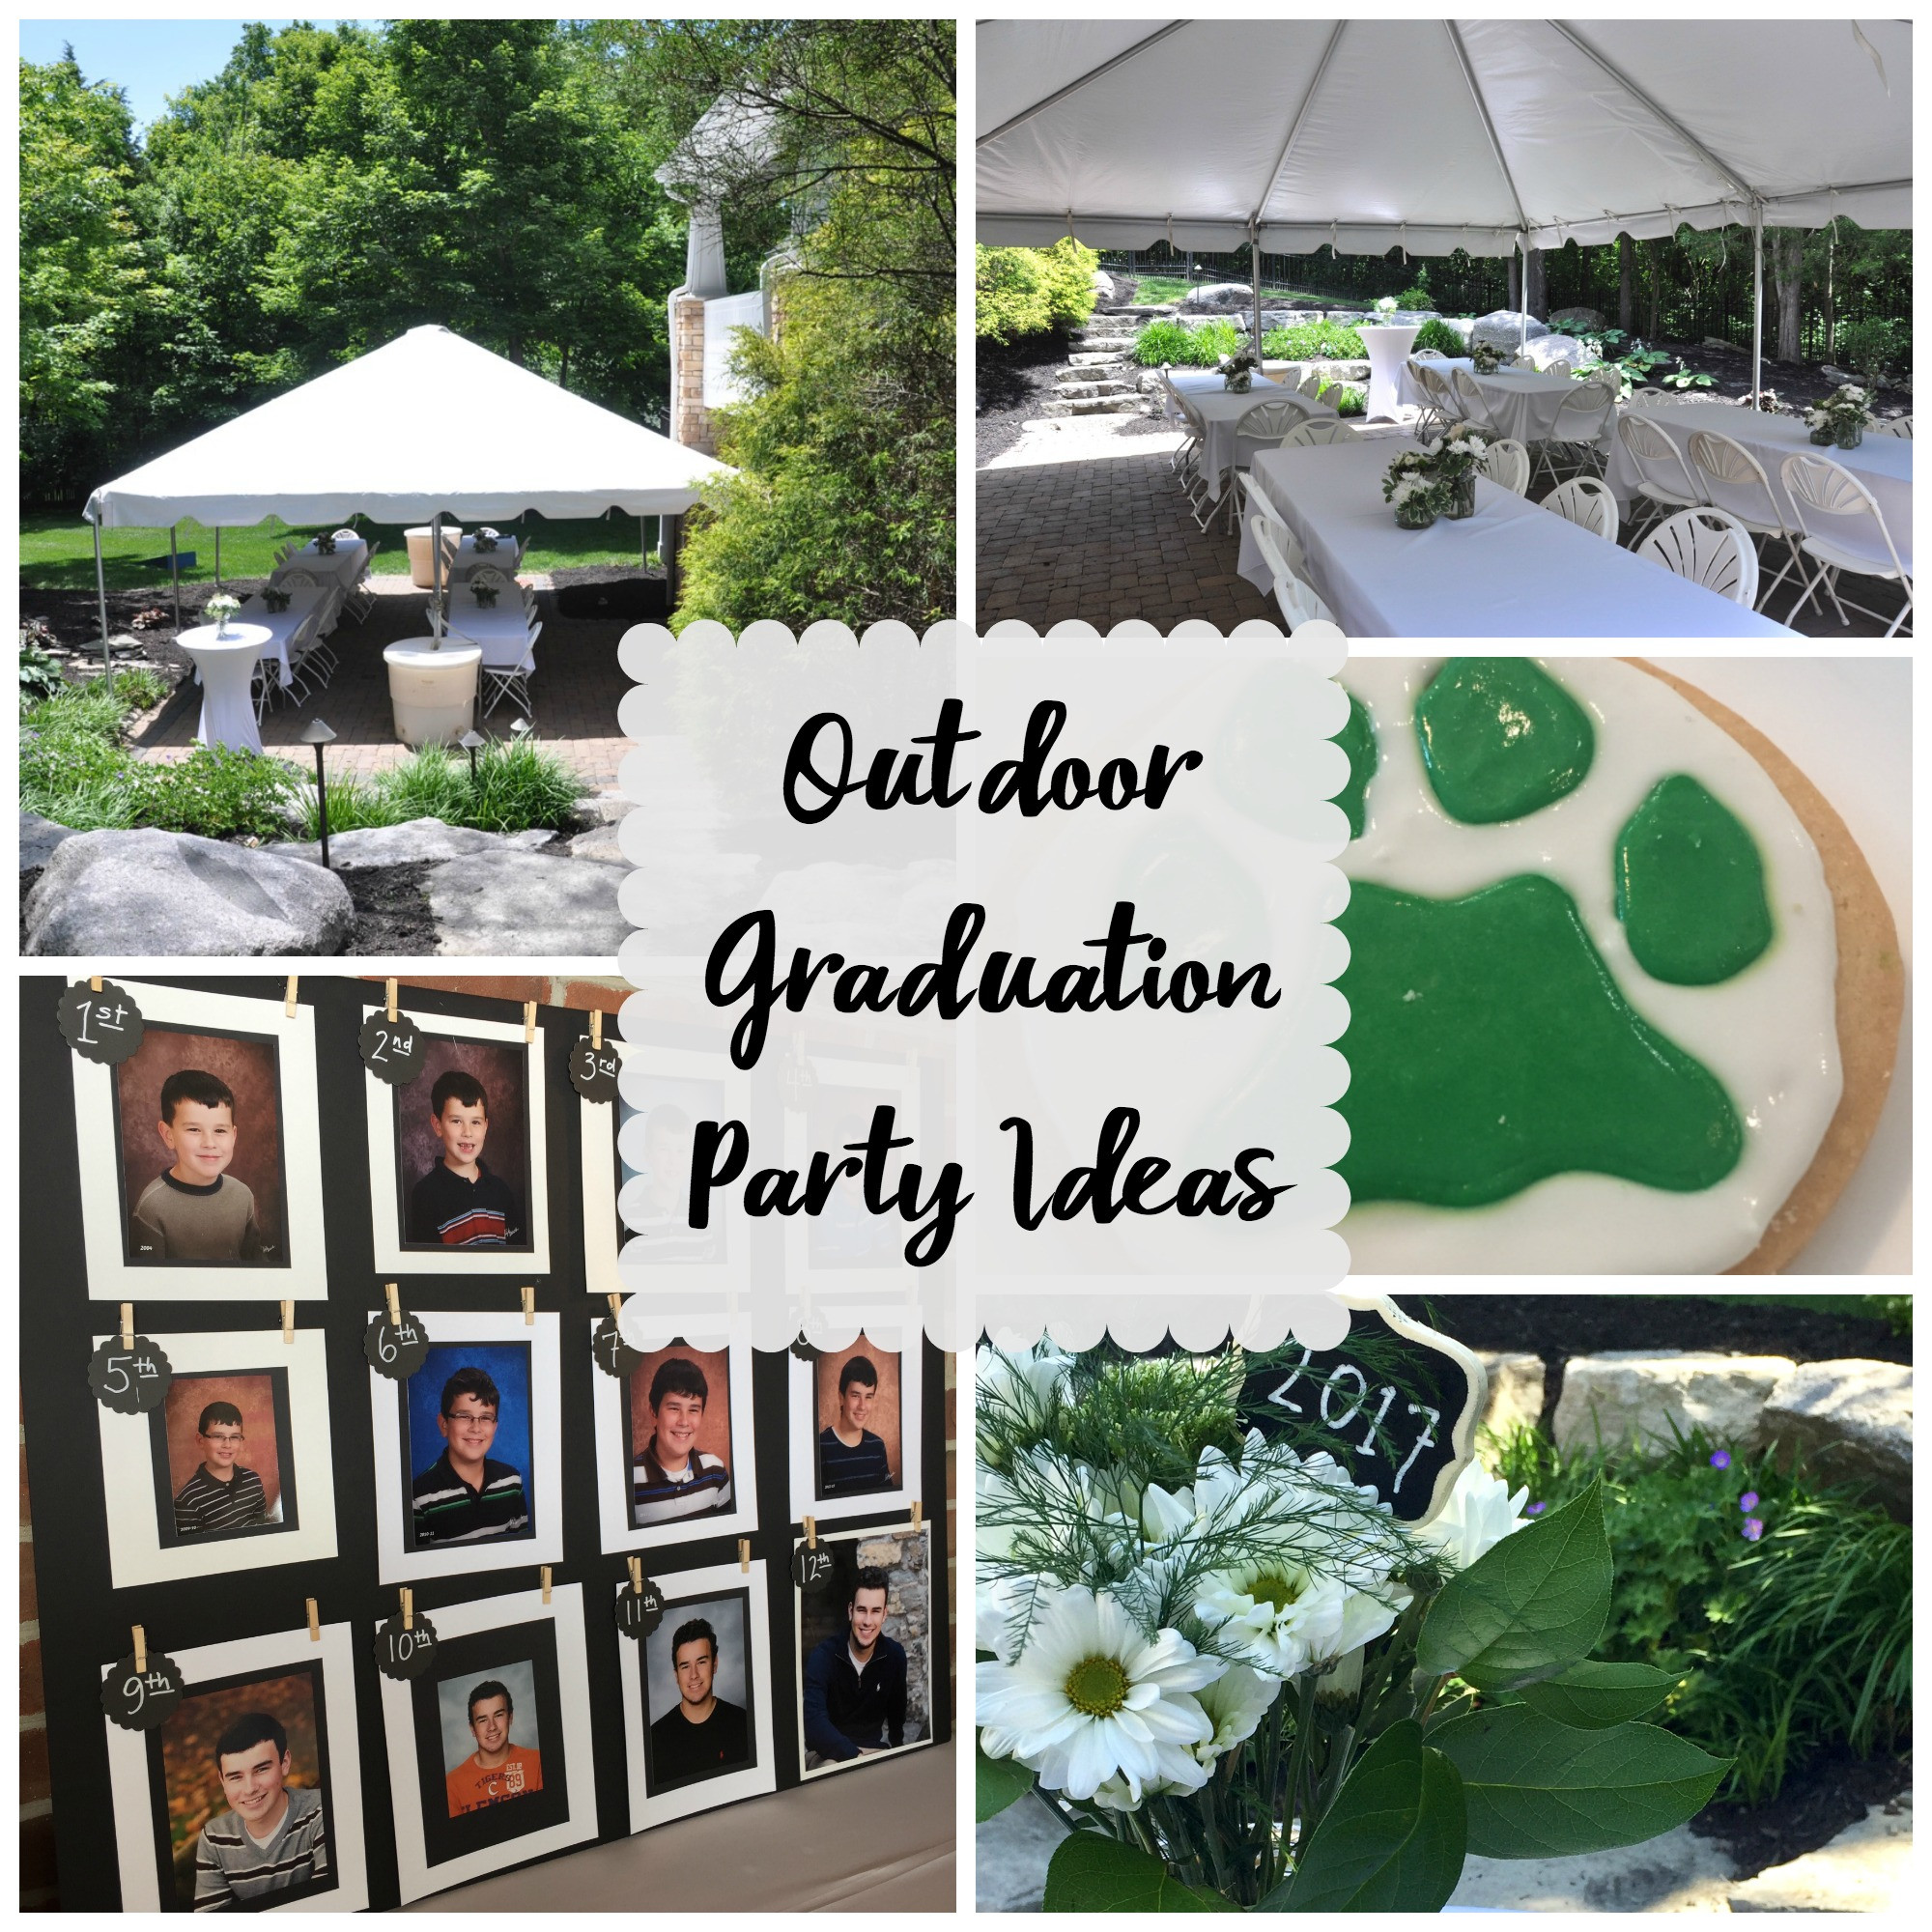 Hs Graduation Party Ideas
 Outdoor Graduation Party Evolution of Style